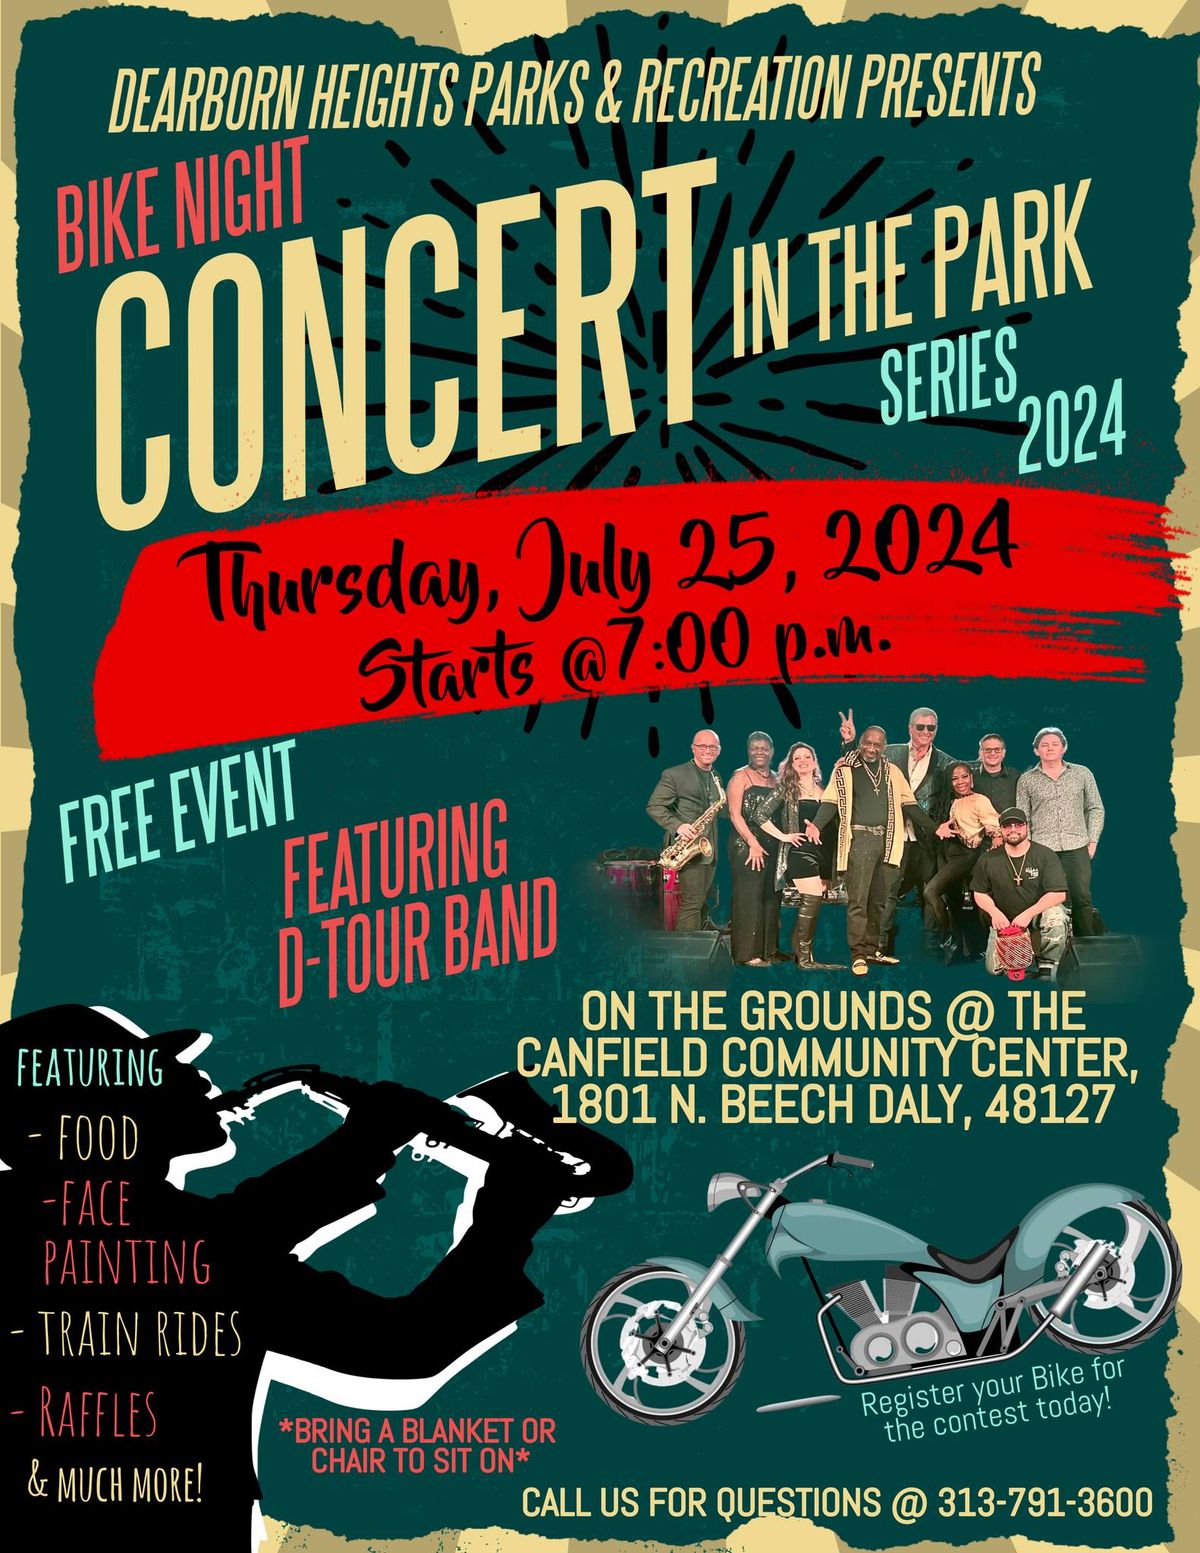 City of Dearborn Heights Concert in the Park - July (Bike Night)